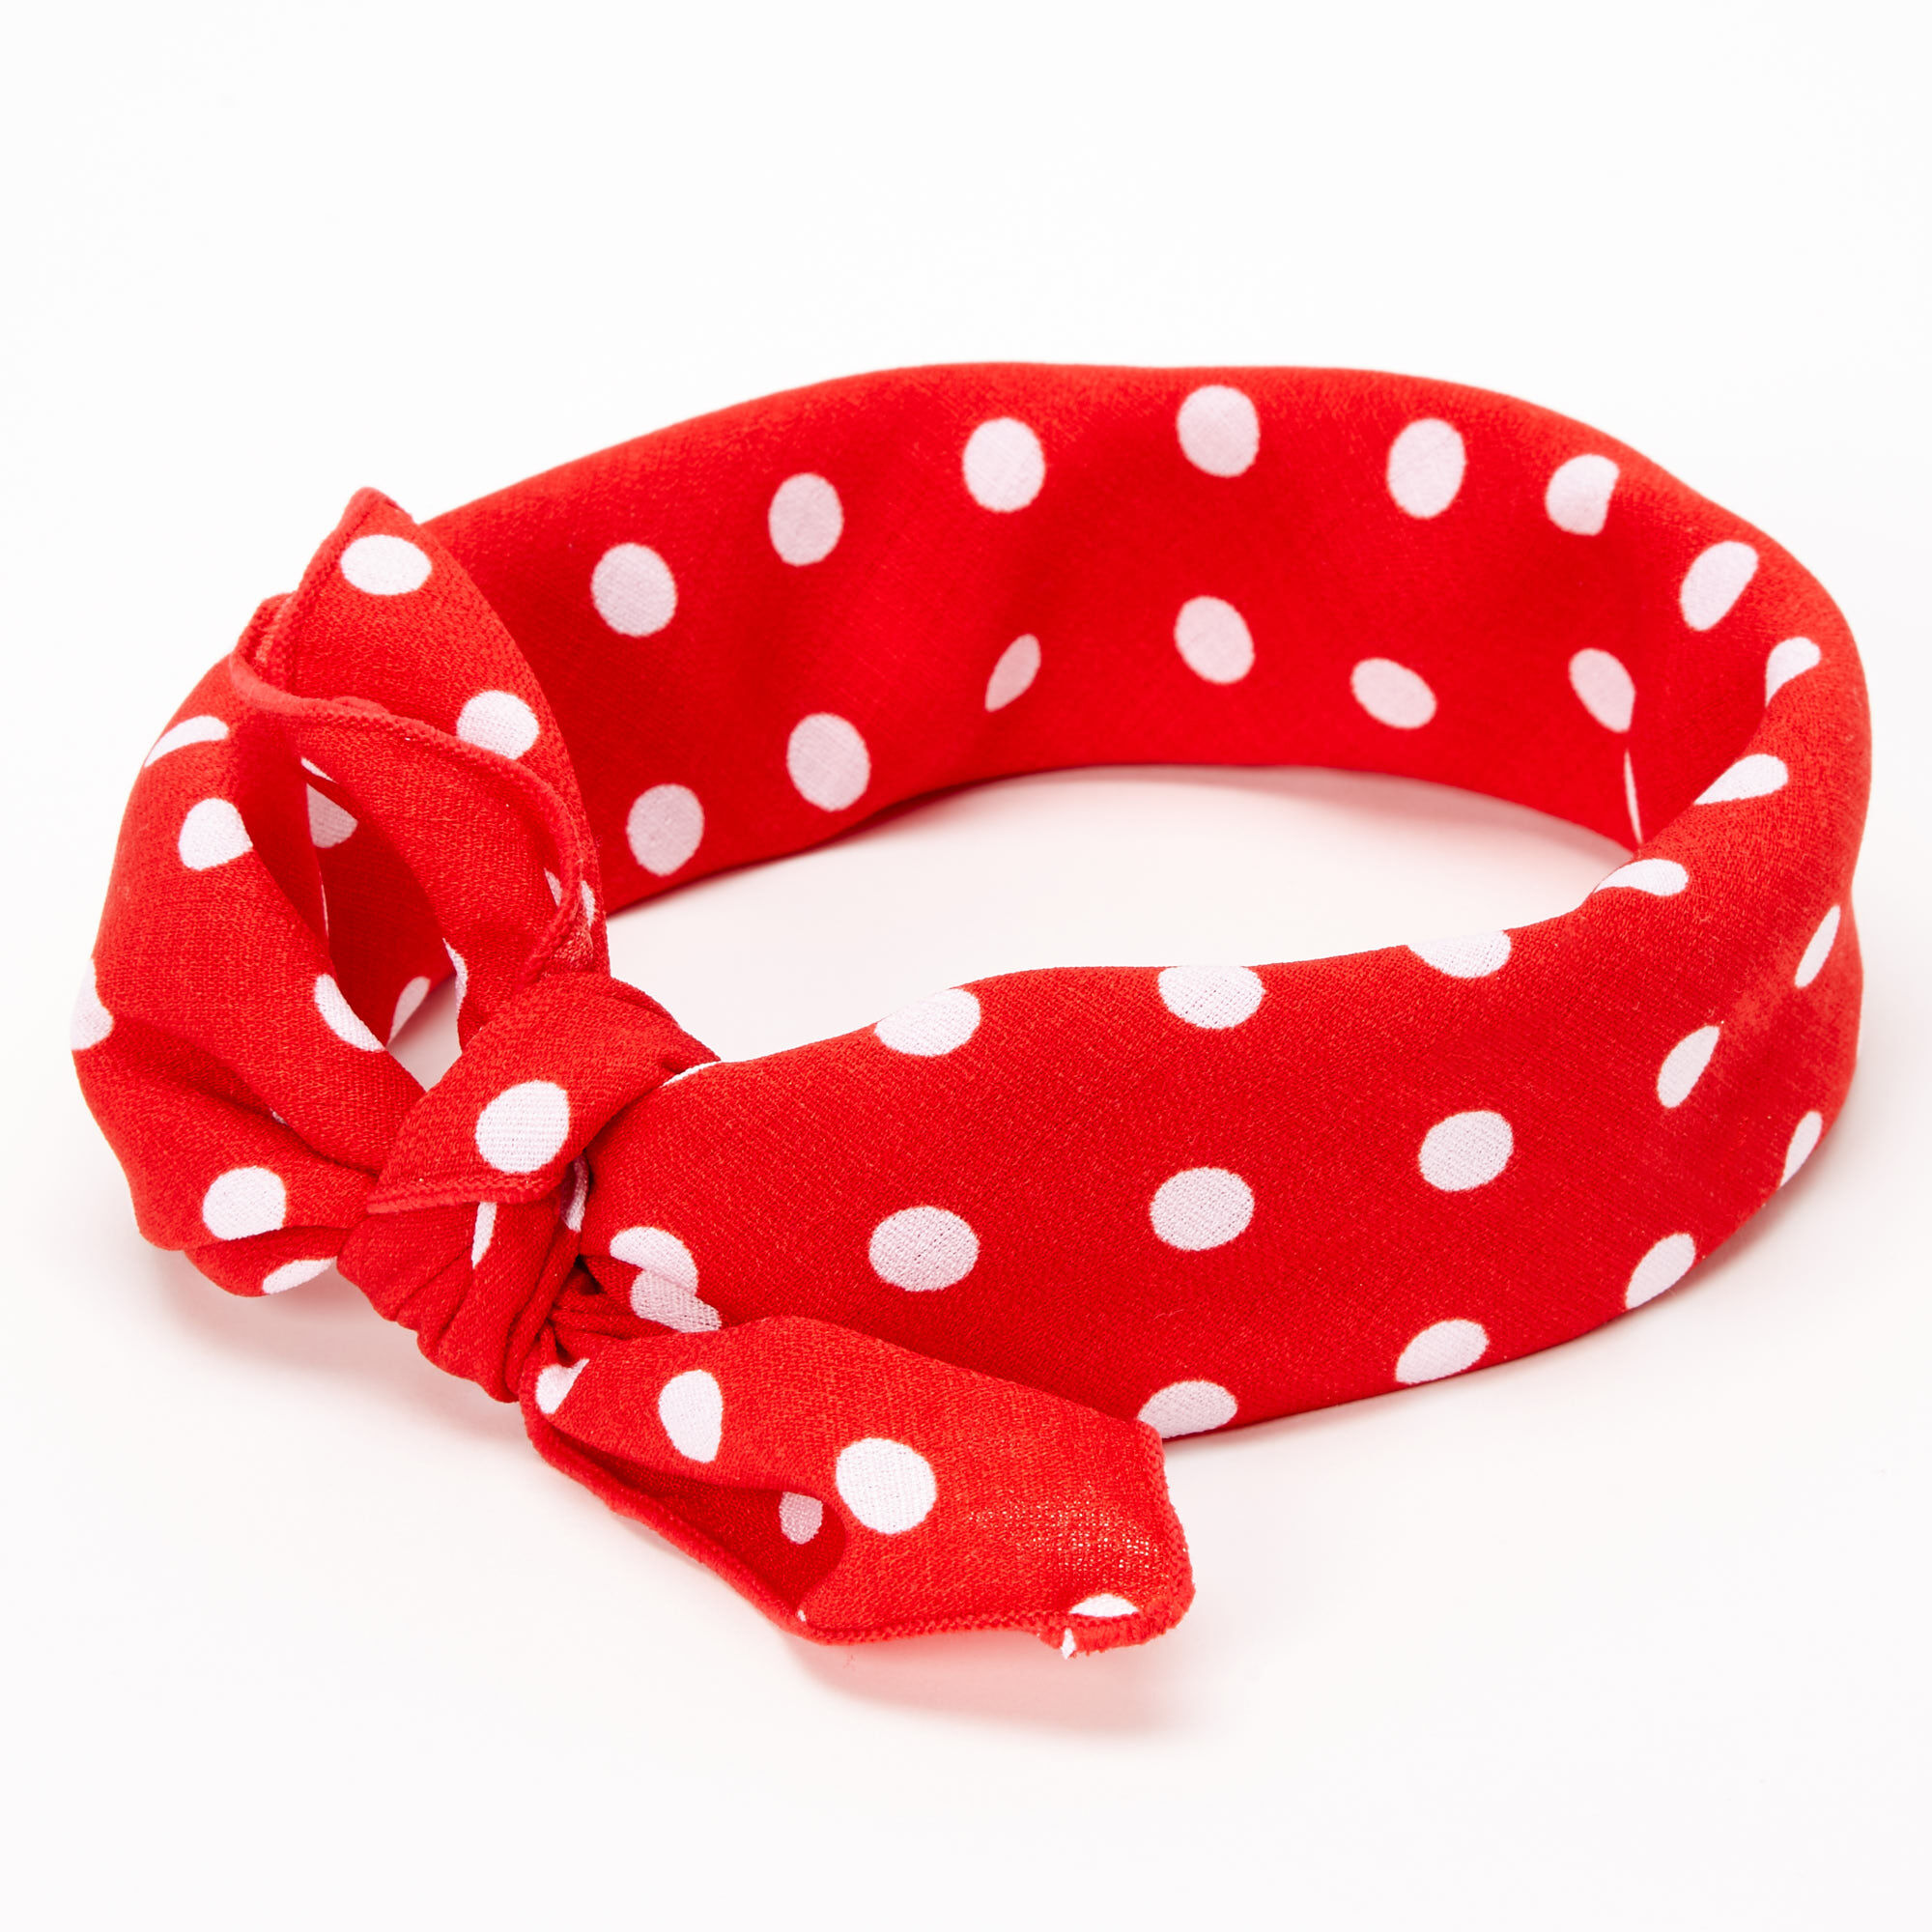 Sale > red scarf with white polka dots > in stock